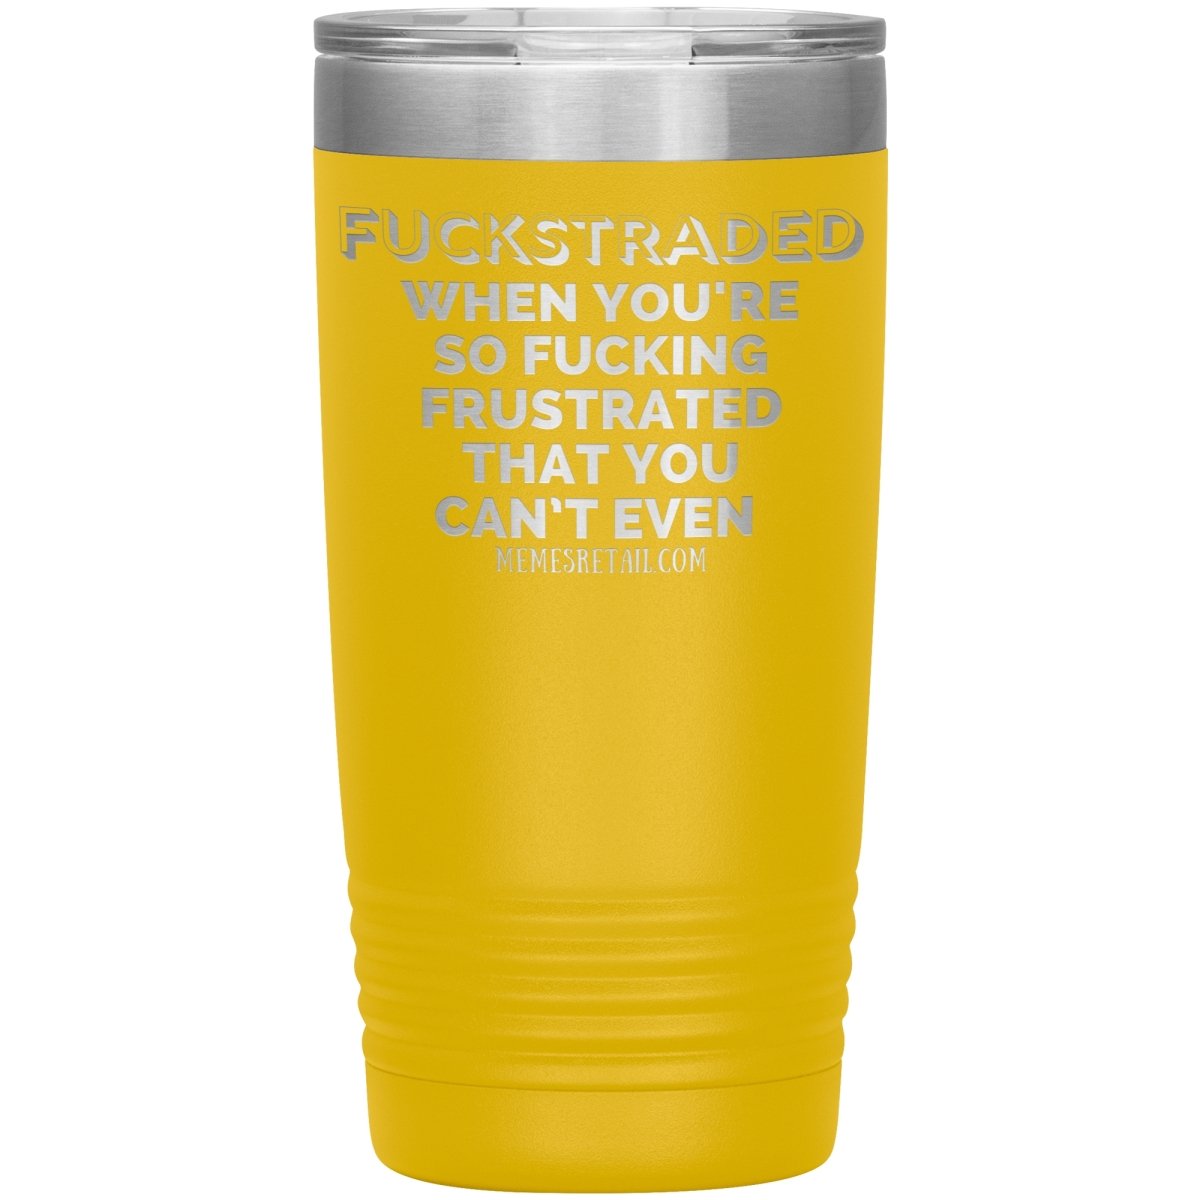 Fuckstraded, When You're So Fucking Frustrated That You Can’t Even Tumblers, 20oz Insulated Tumbler / Yellow - MemesRetail.com